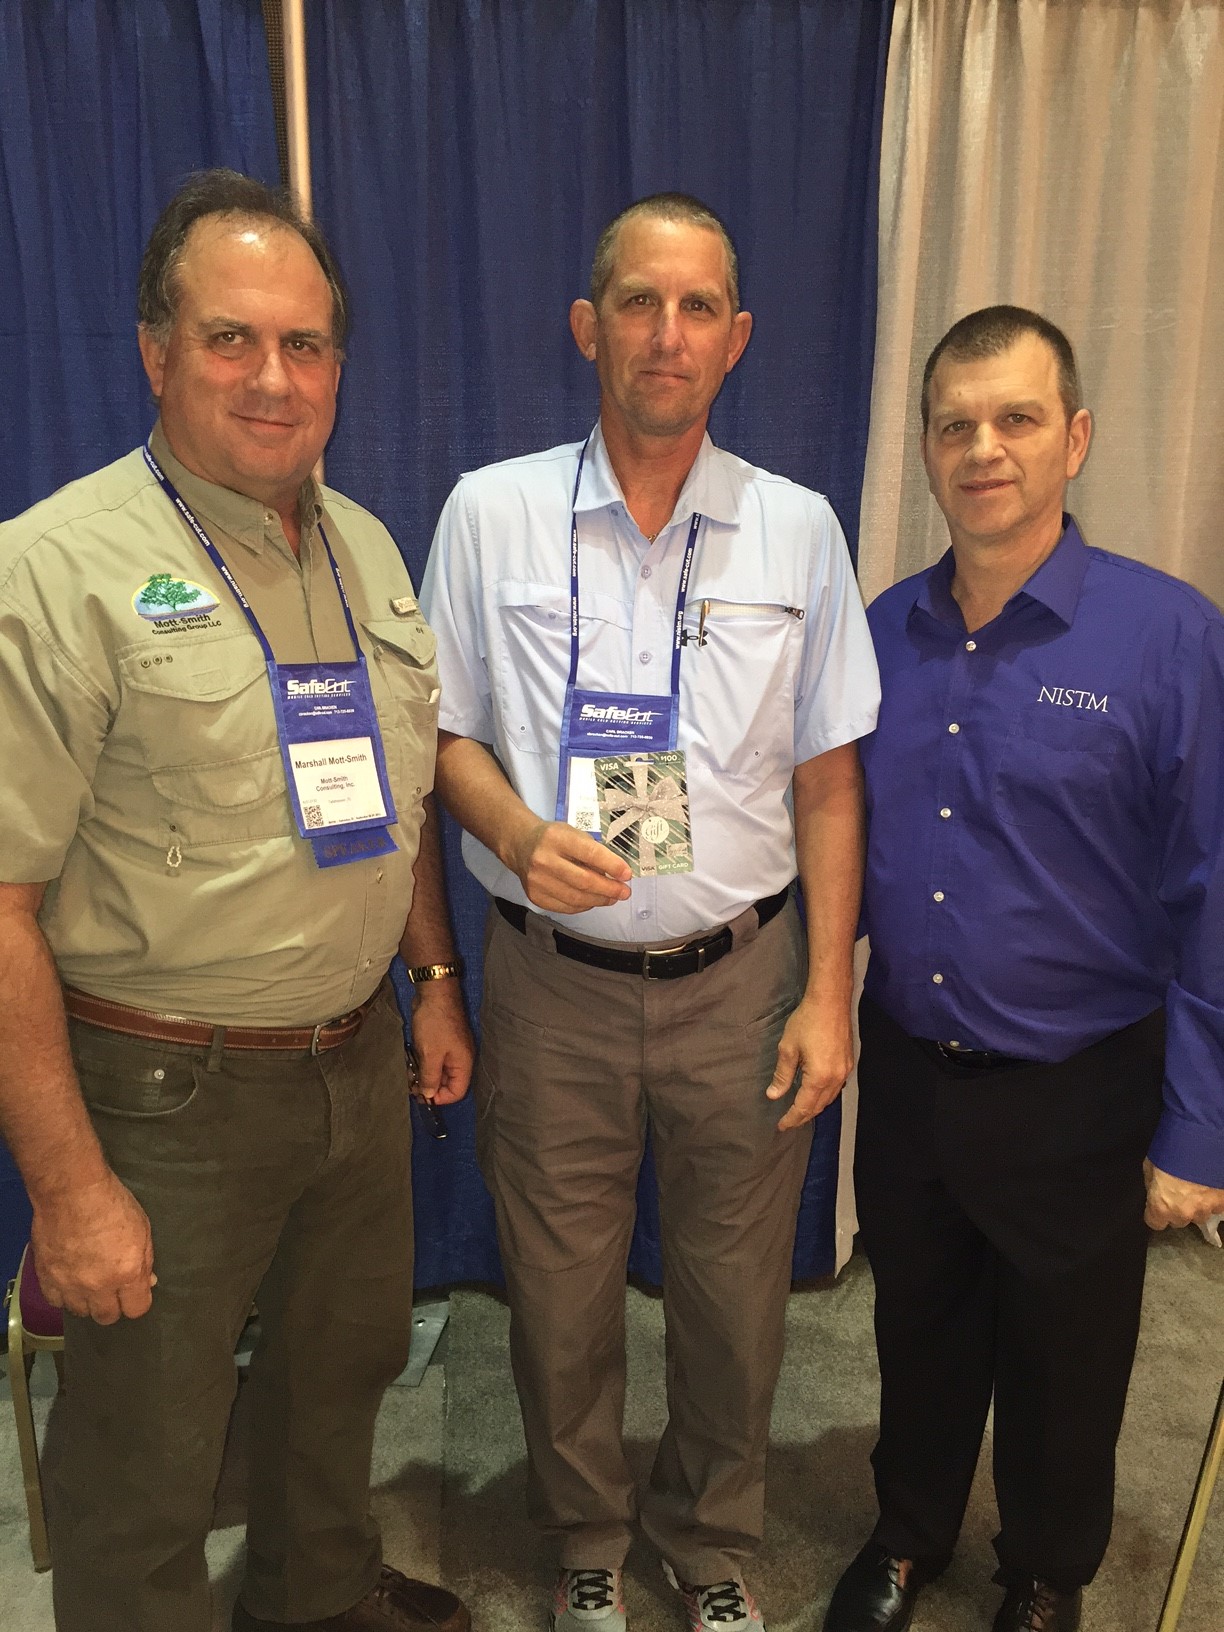 4th Place Winner
Paul Taylor from PBF Energy – Chalmette Refinery
won the $100 Visa Gift Card

